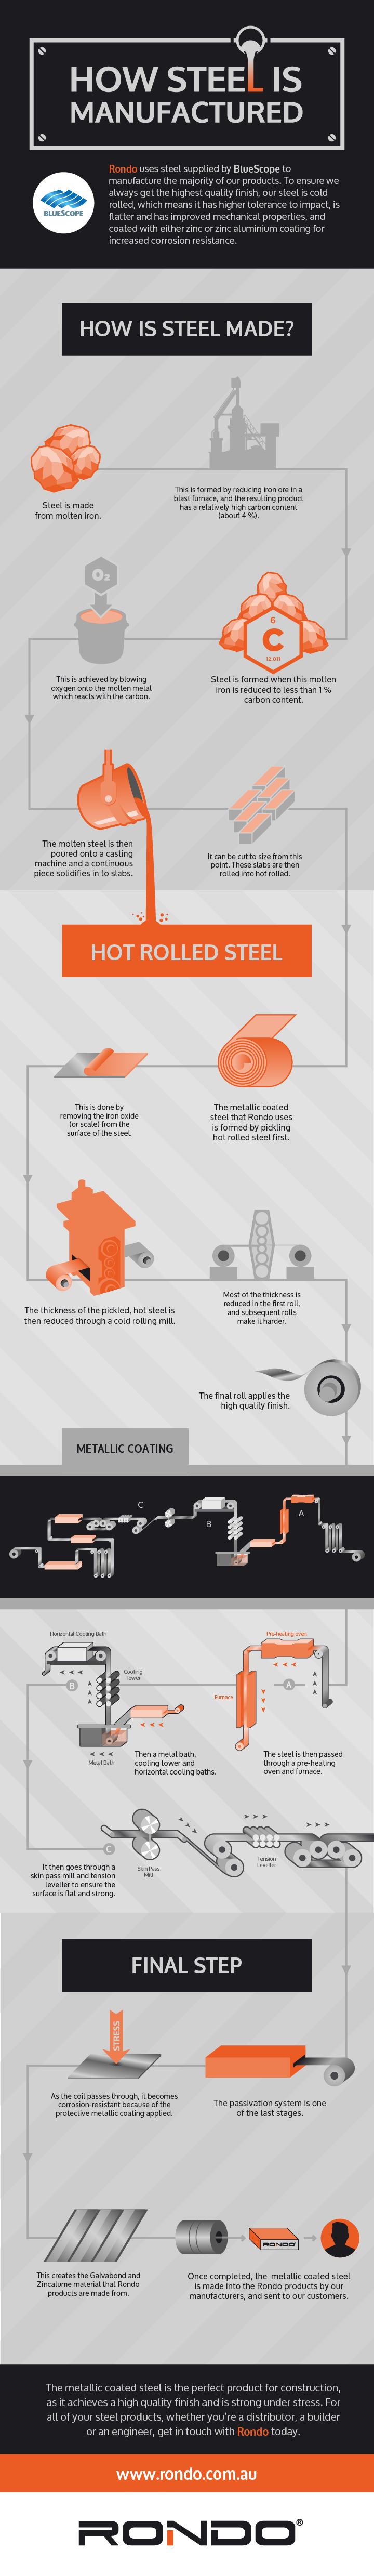 How Steel is Manufactured Infographic